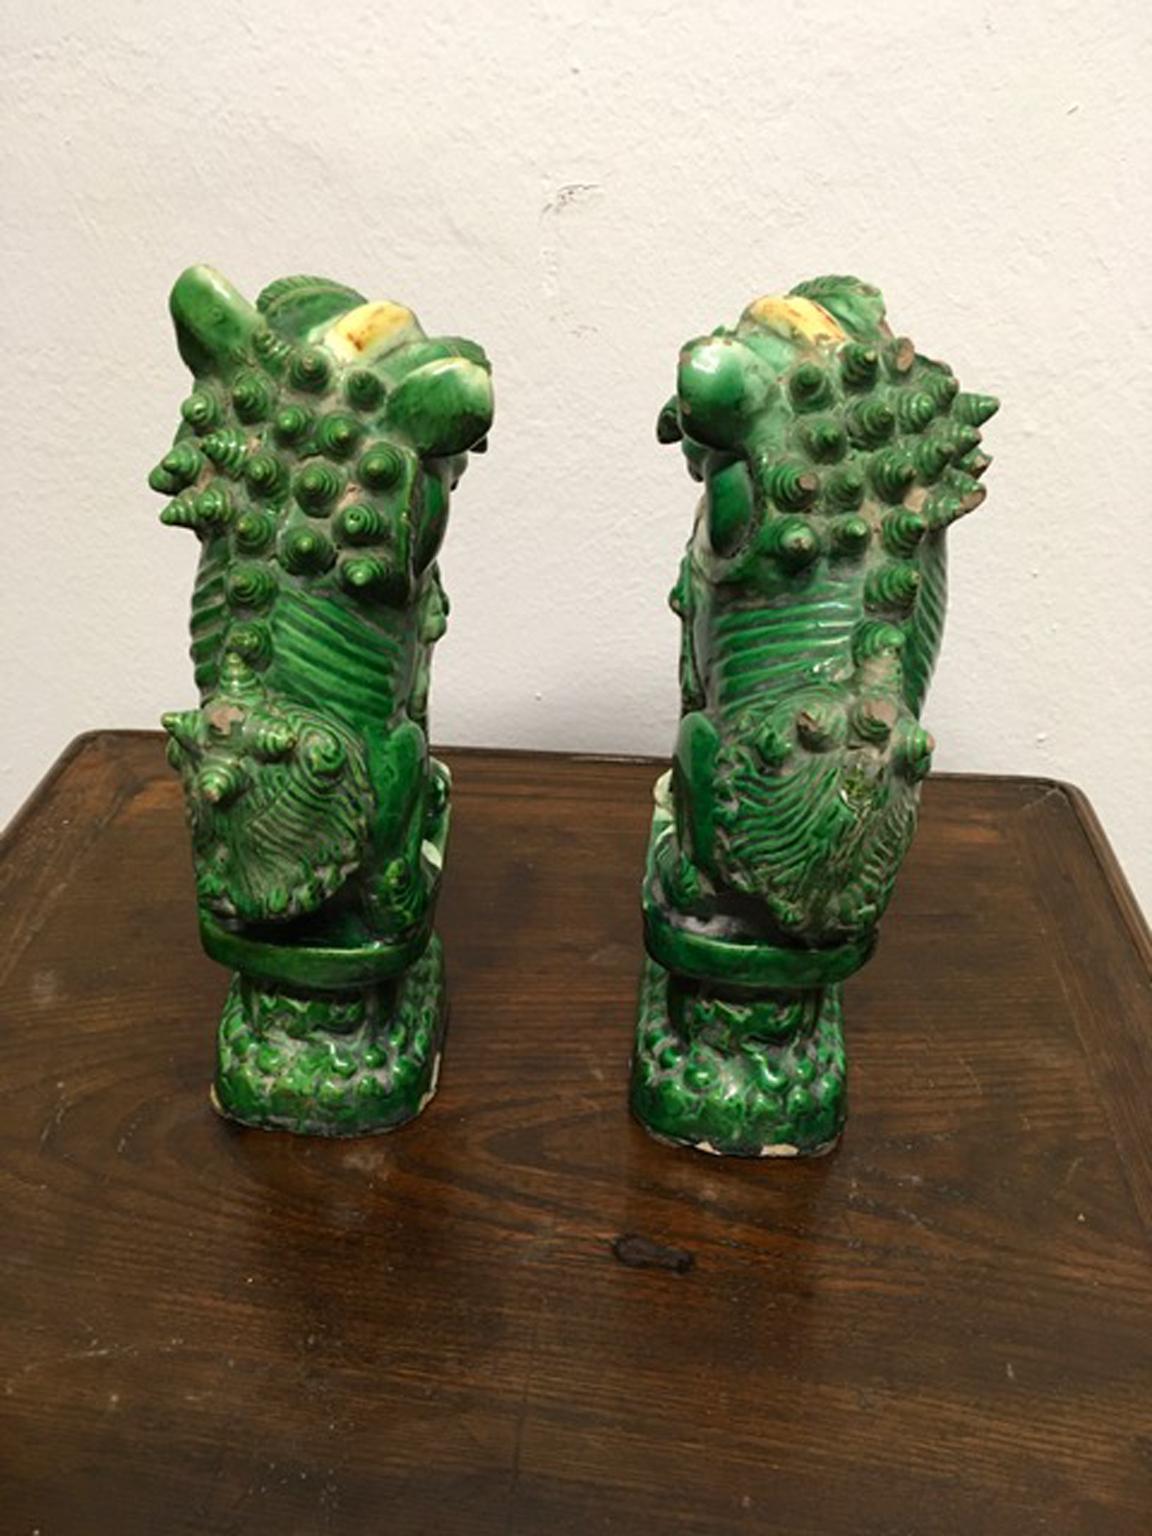 Hand-Crafted Qing Dinasty Mid-20th Century Pair Ceramic Green Enameled Pho Dogs China Export For Sale